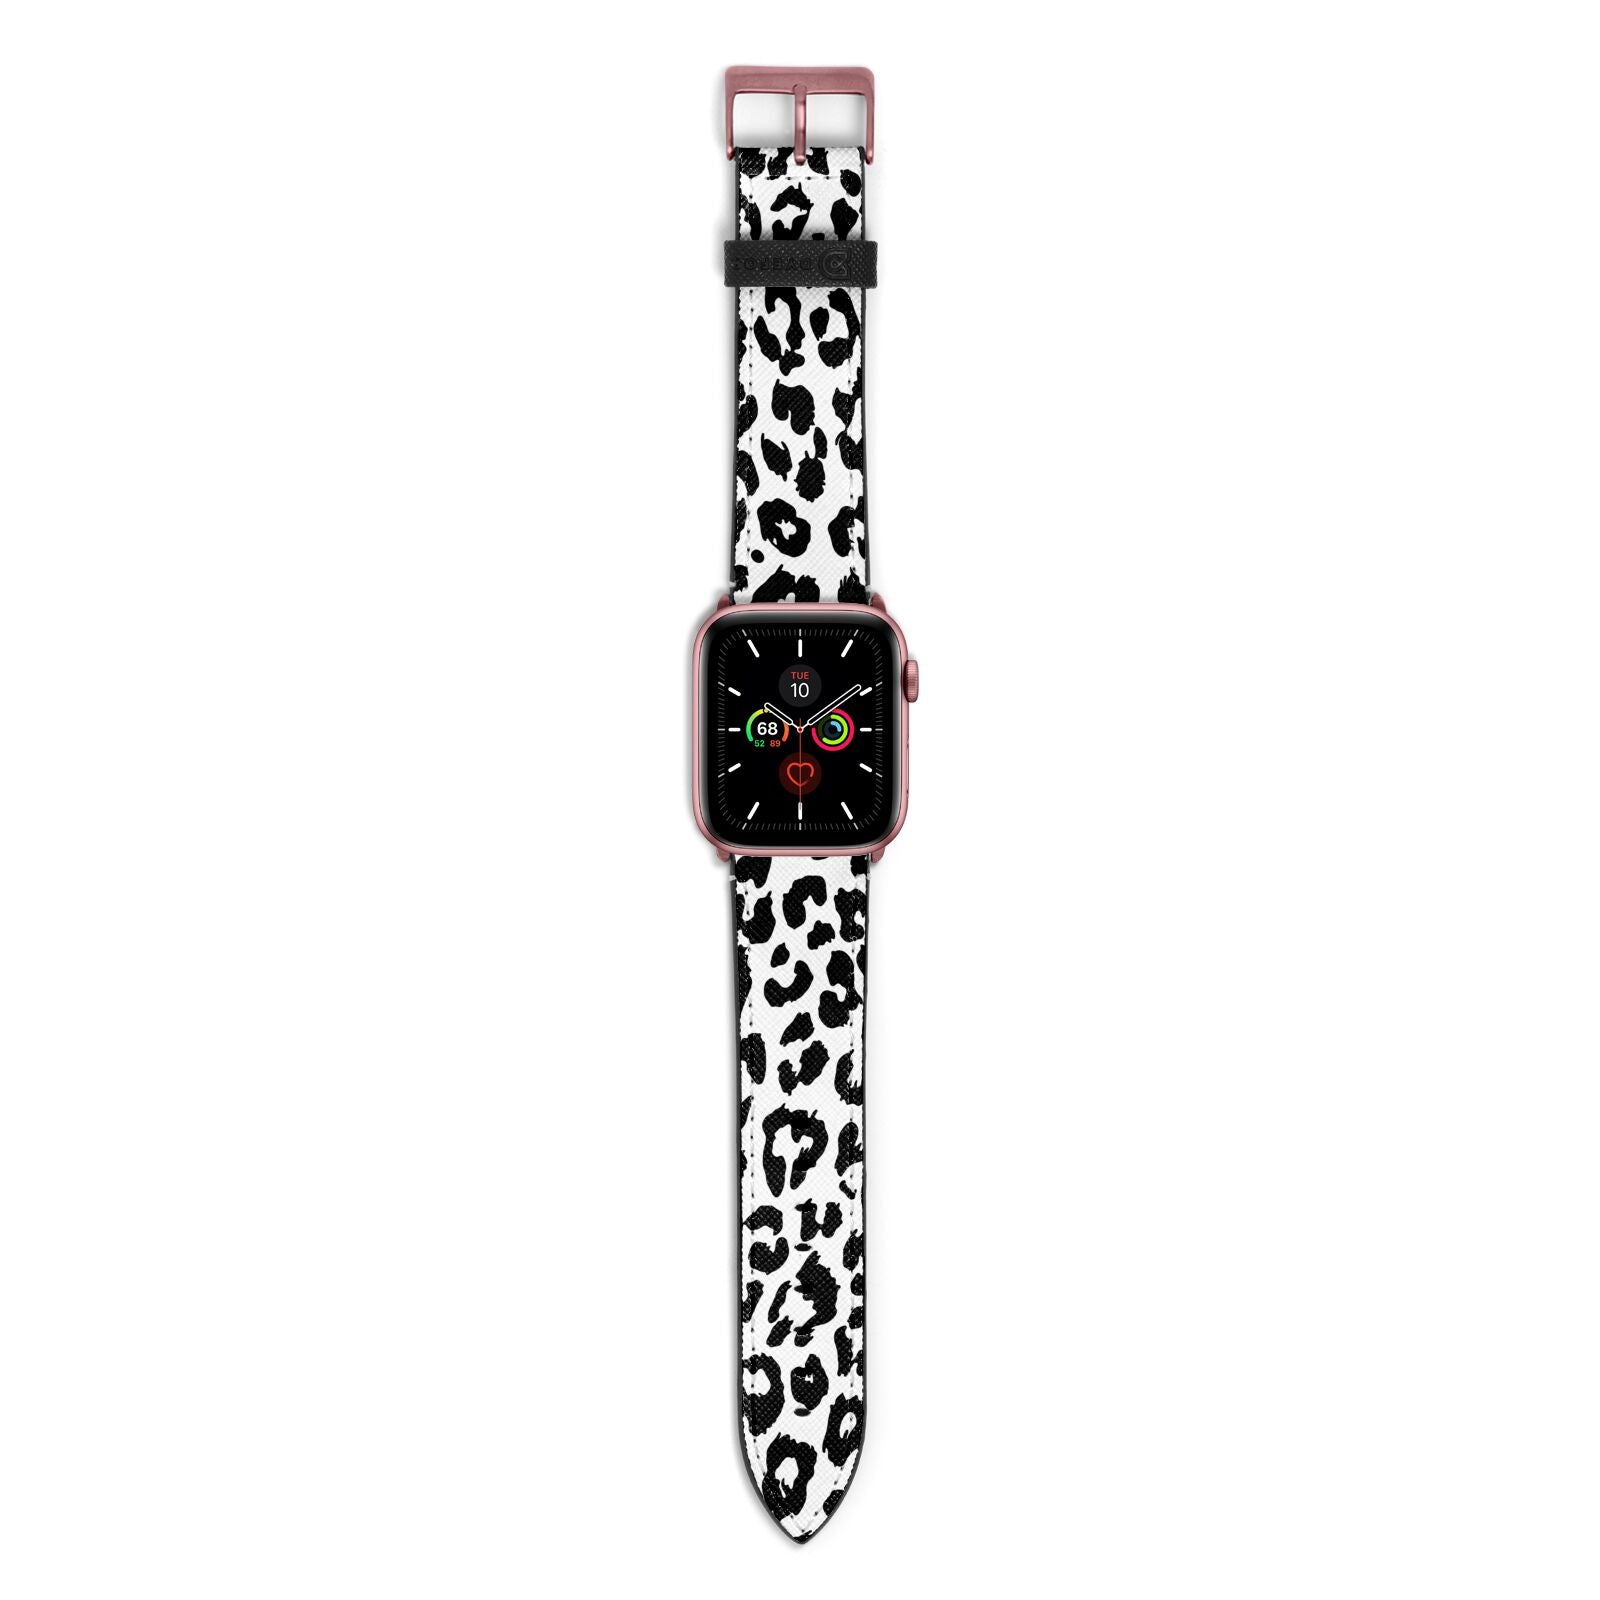 Black Leopard Print Apple Watch Strap with Rose Gold Hardware